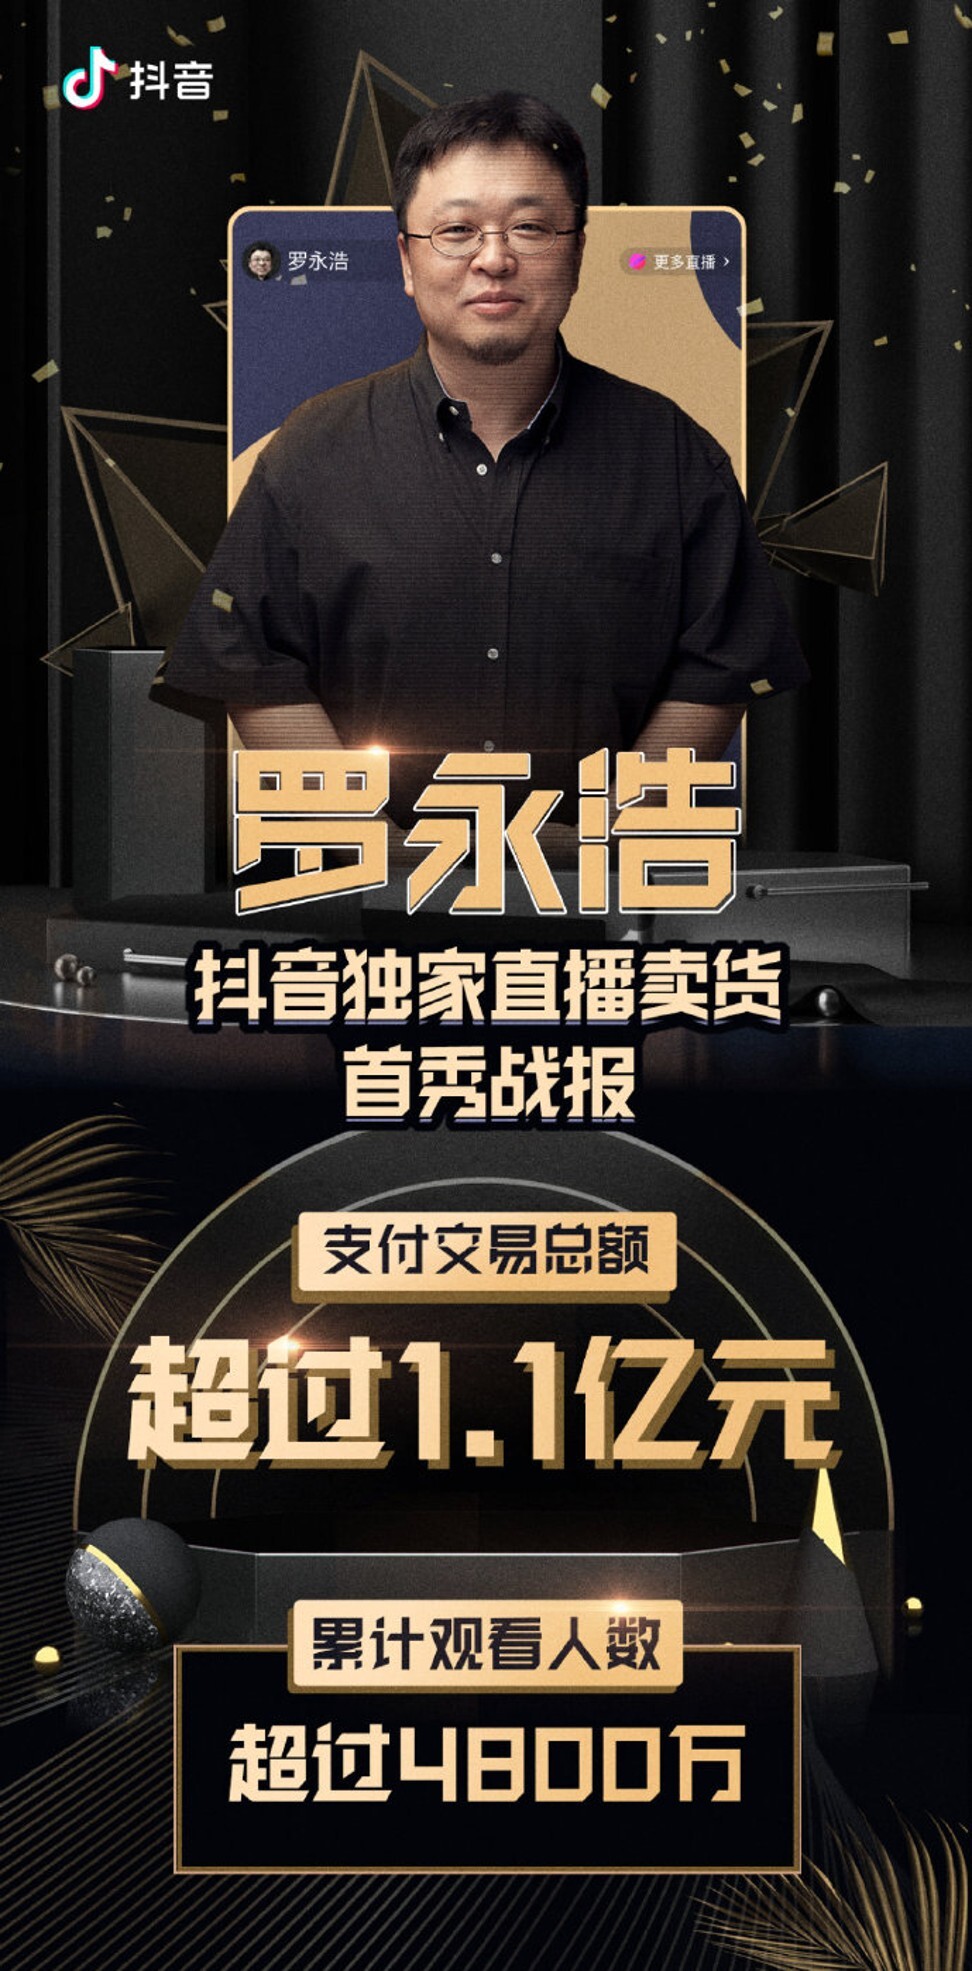 Luo Yonghao sold goods worth more than 110 million yuan (US$15,530,581) on TikTok. Photo: Weibo